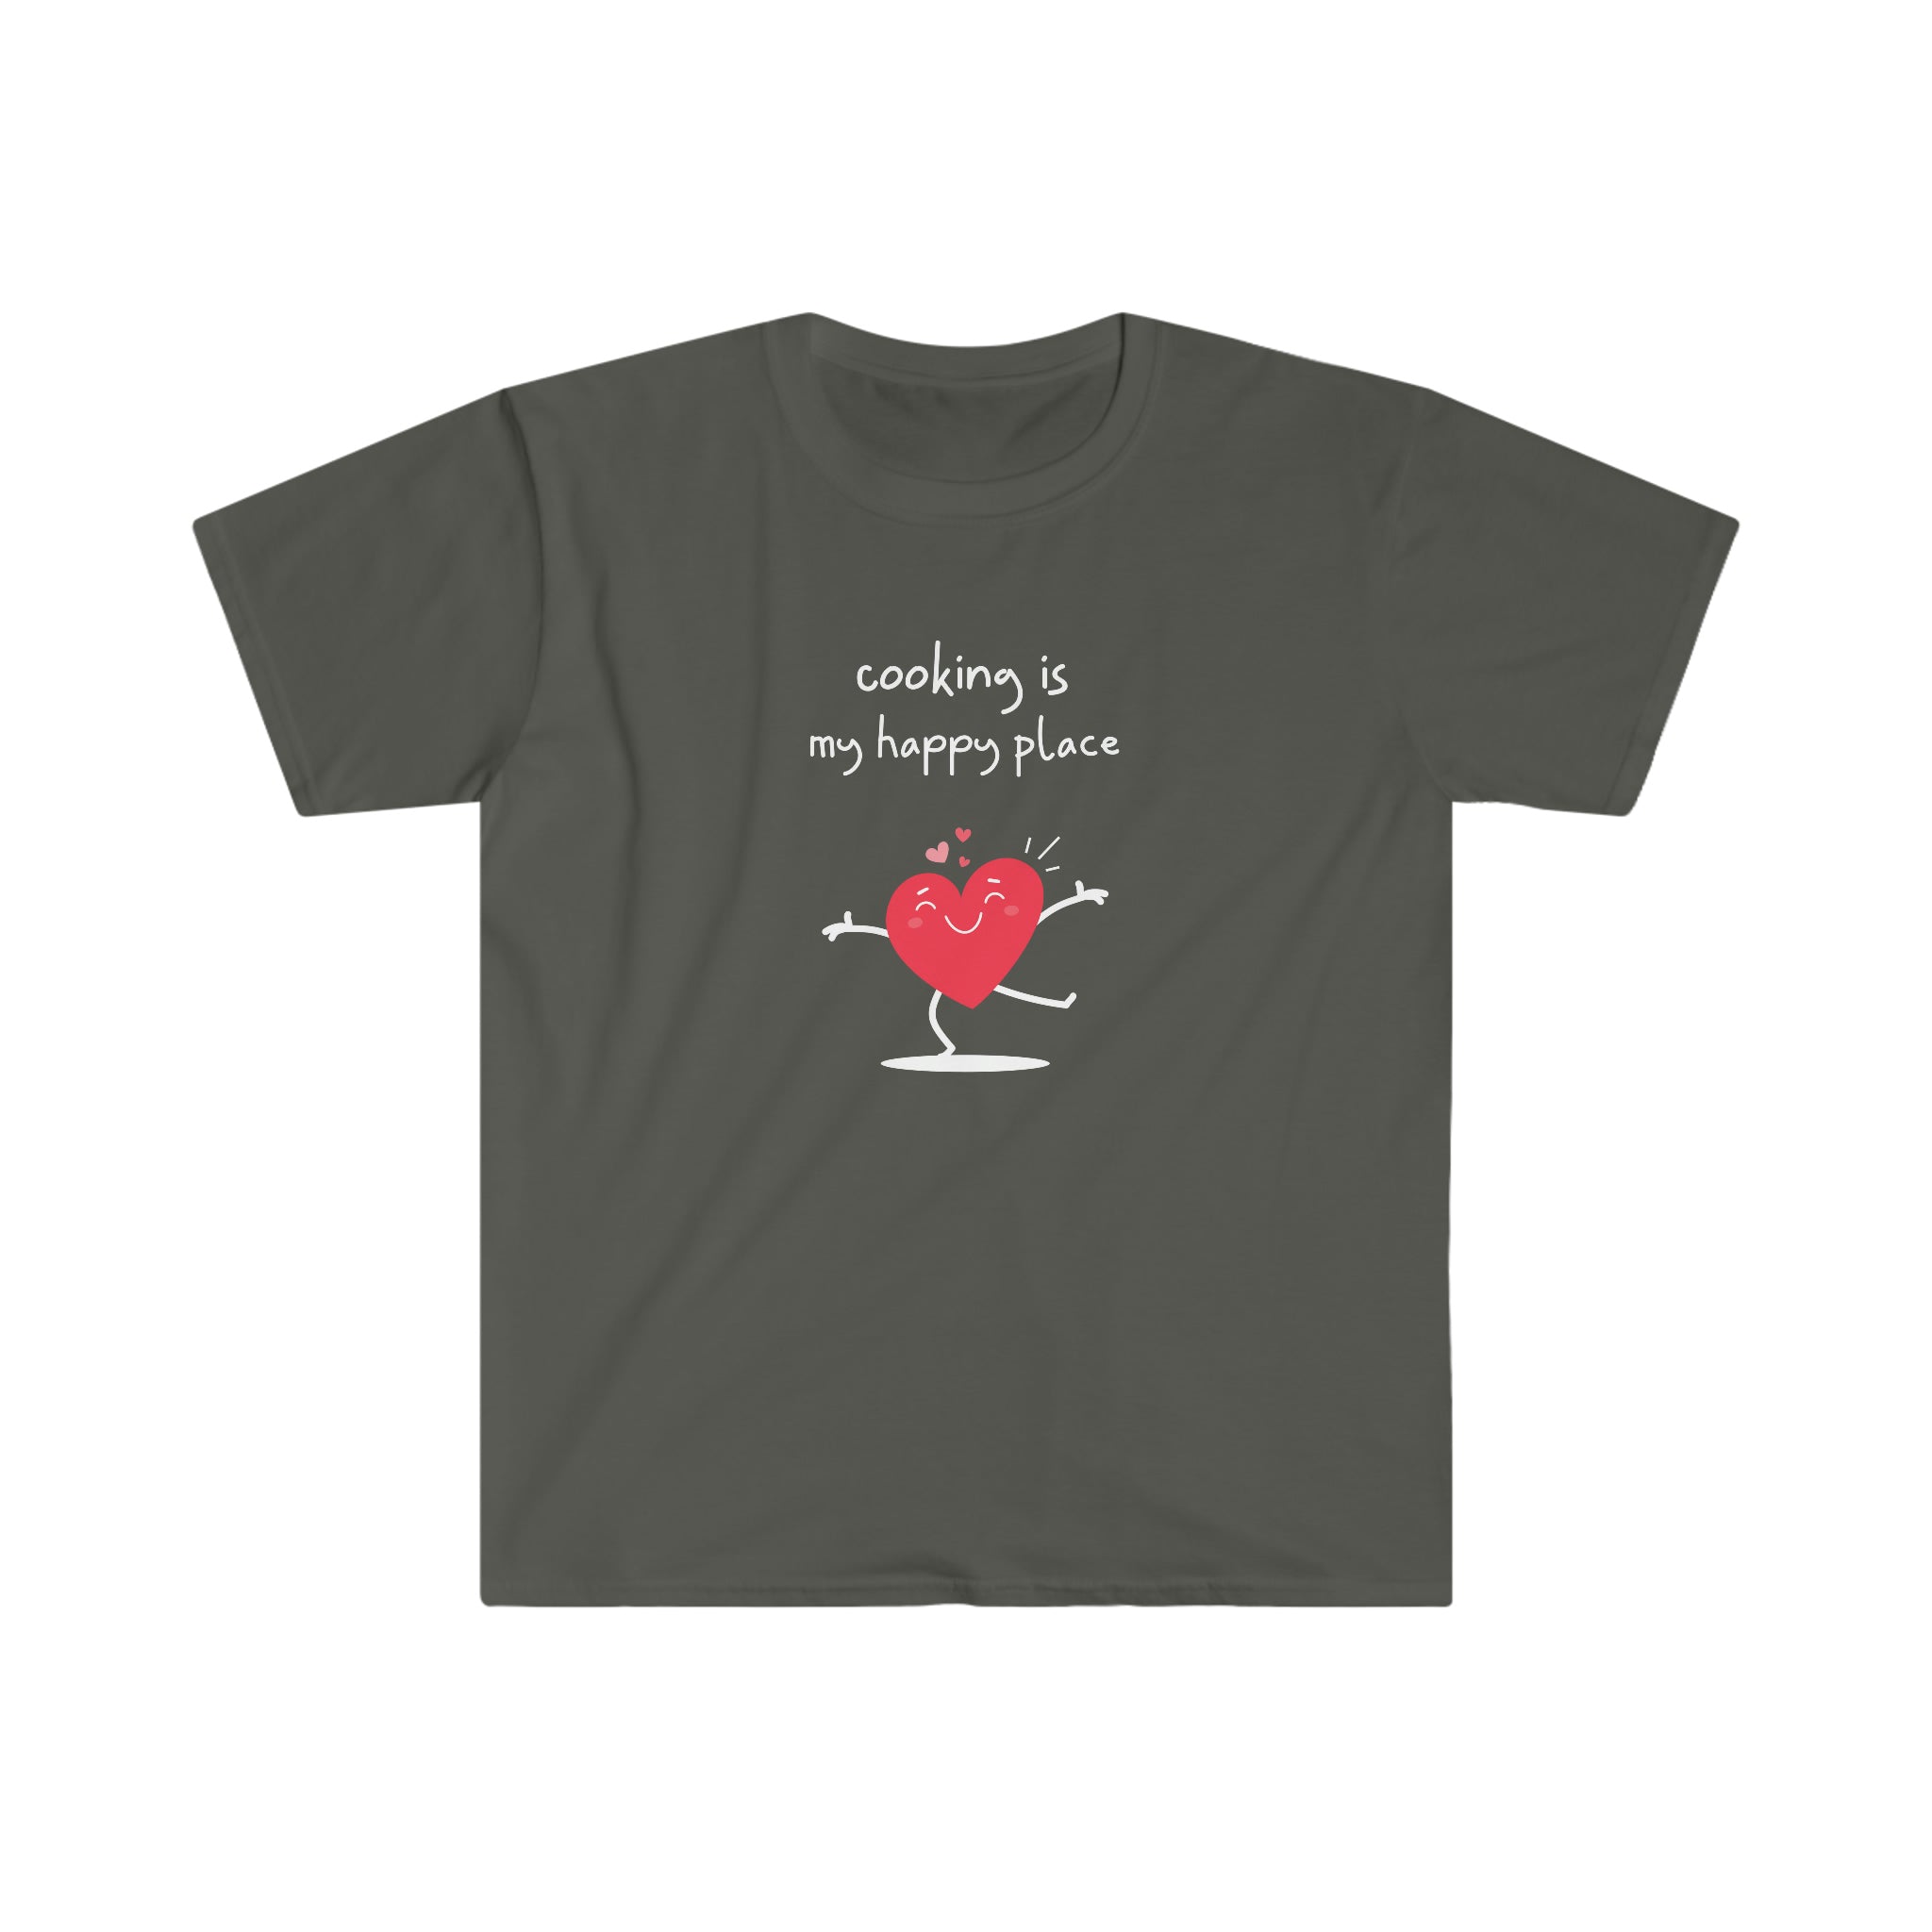 T-shirt, super soft, "Cooking is My Happy Place" T-Shirt - Comfortable, Chic and Playful - cooking t-shirt #6